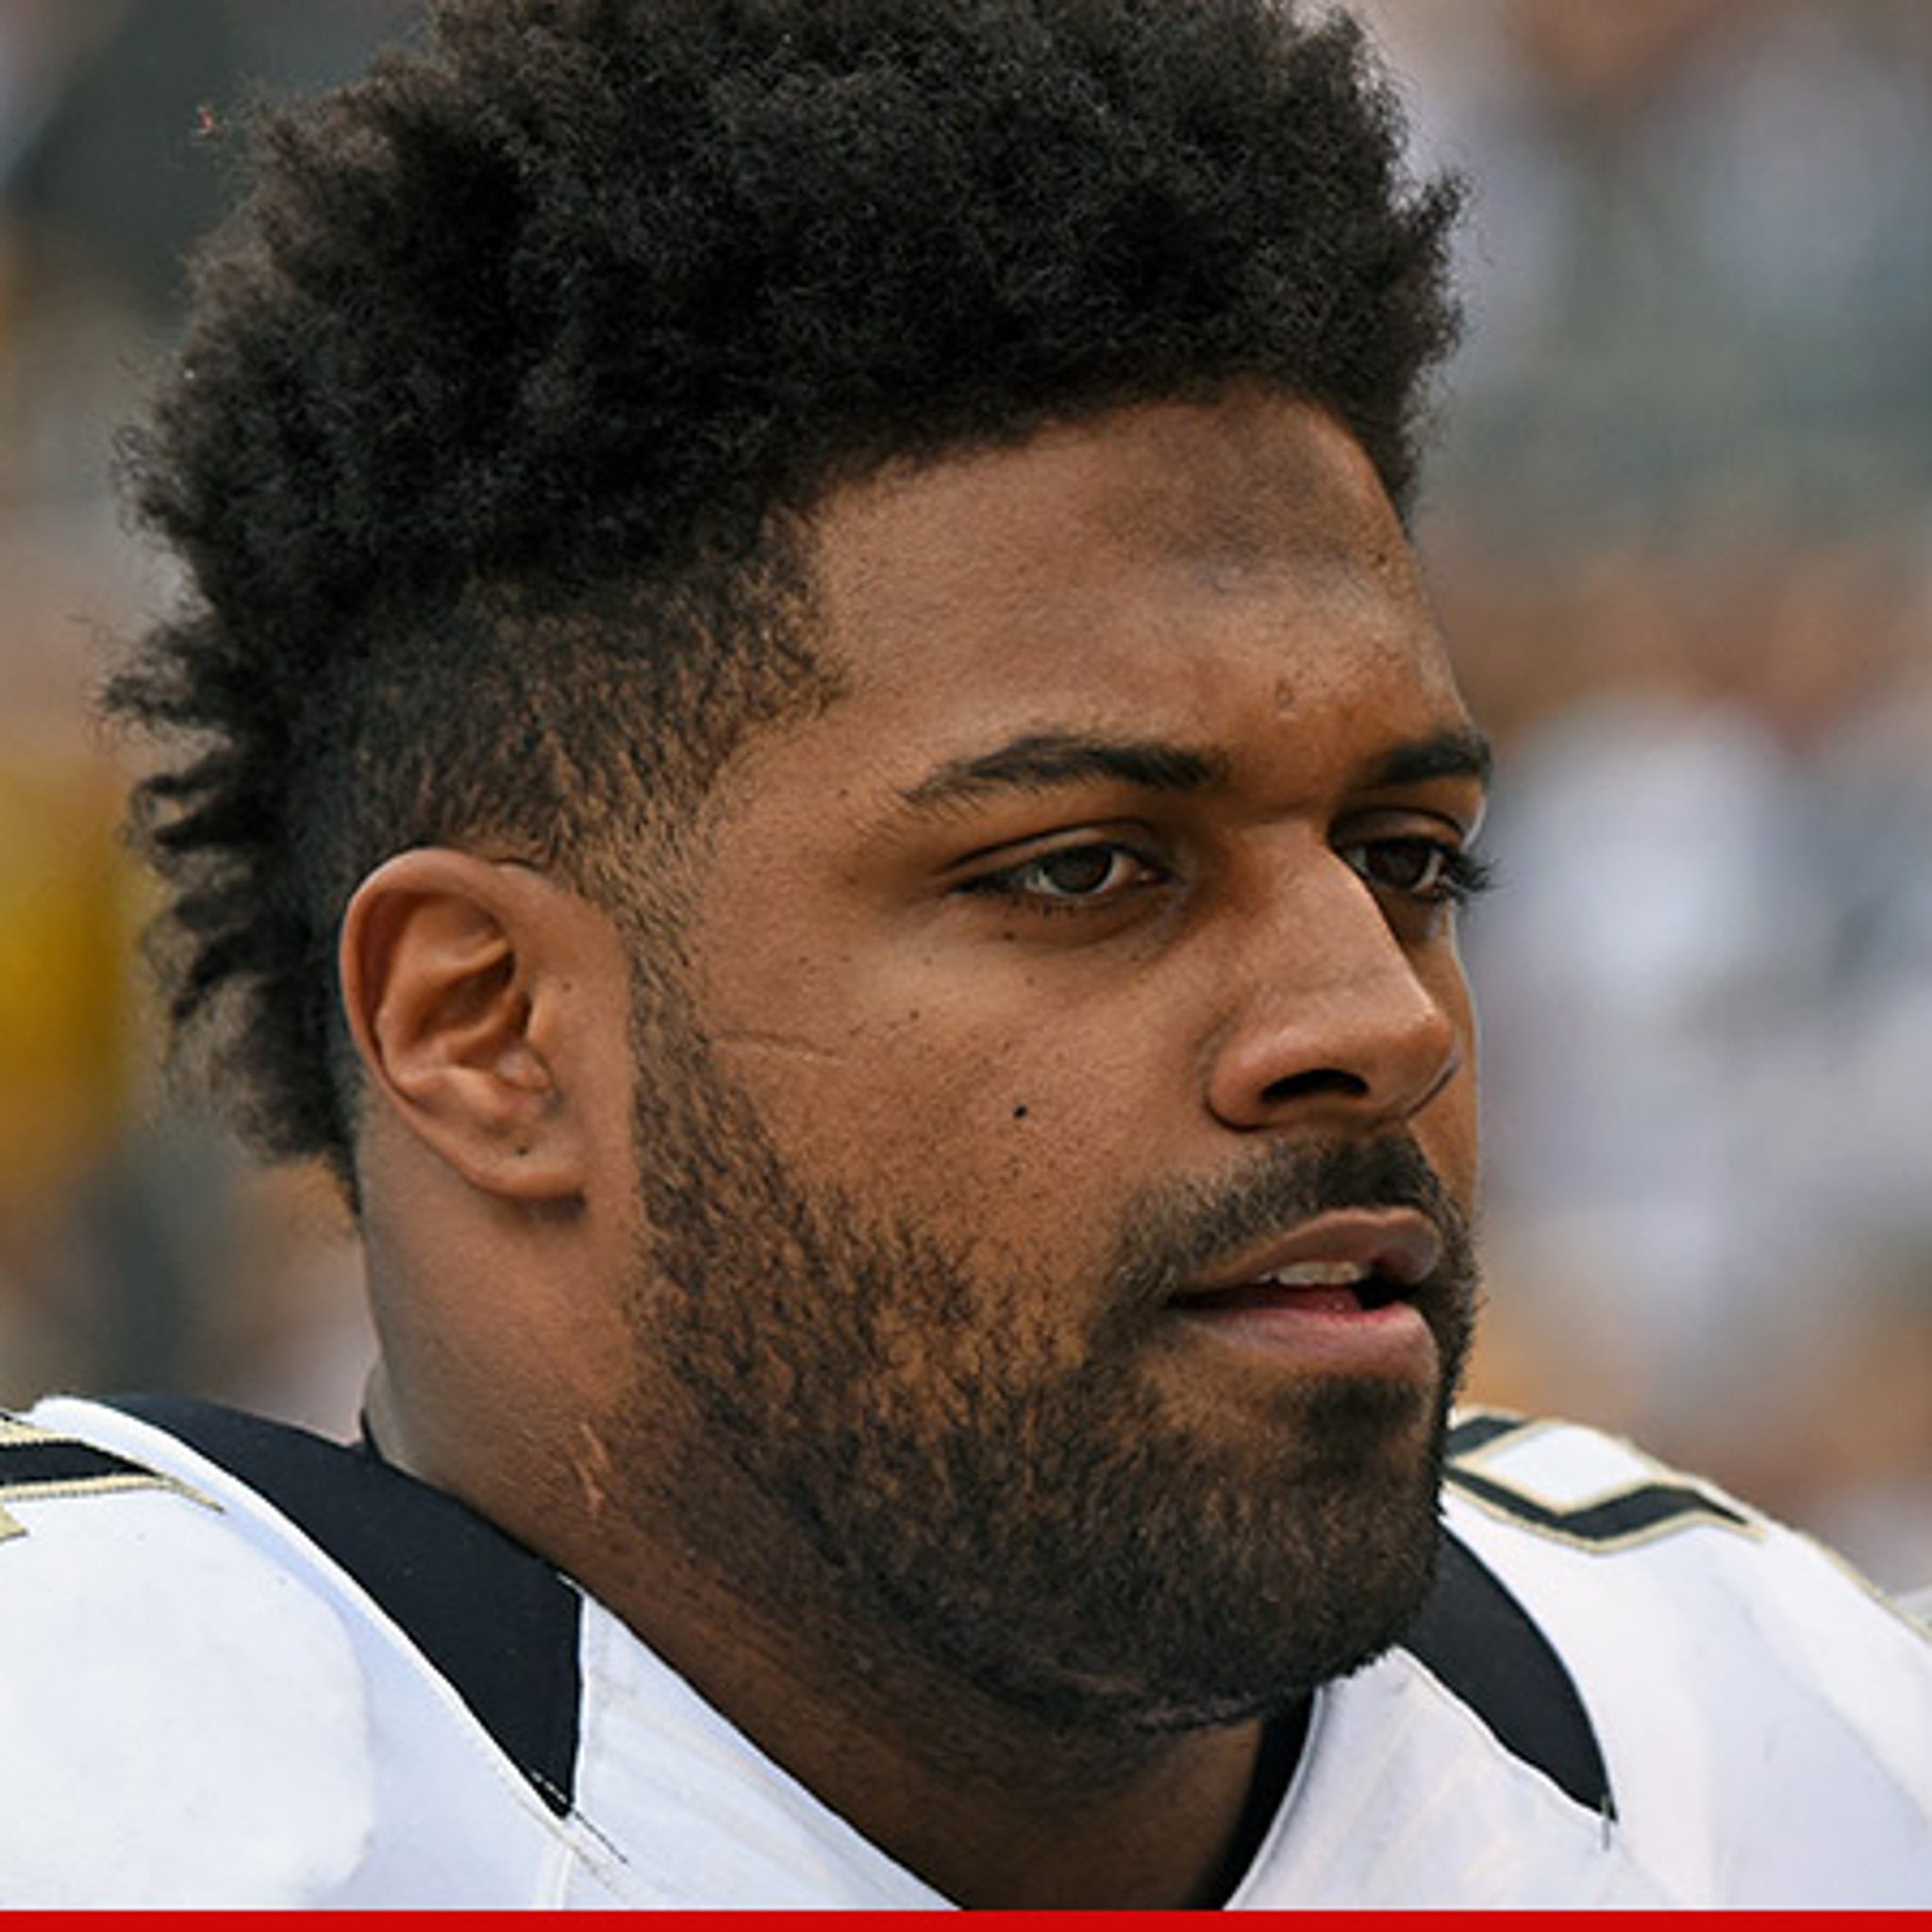 Cameron Jordan Police Report -- 'I Can Have Any B*tch I Want'